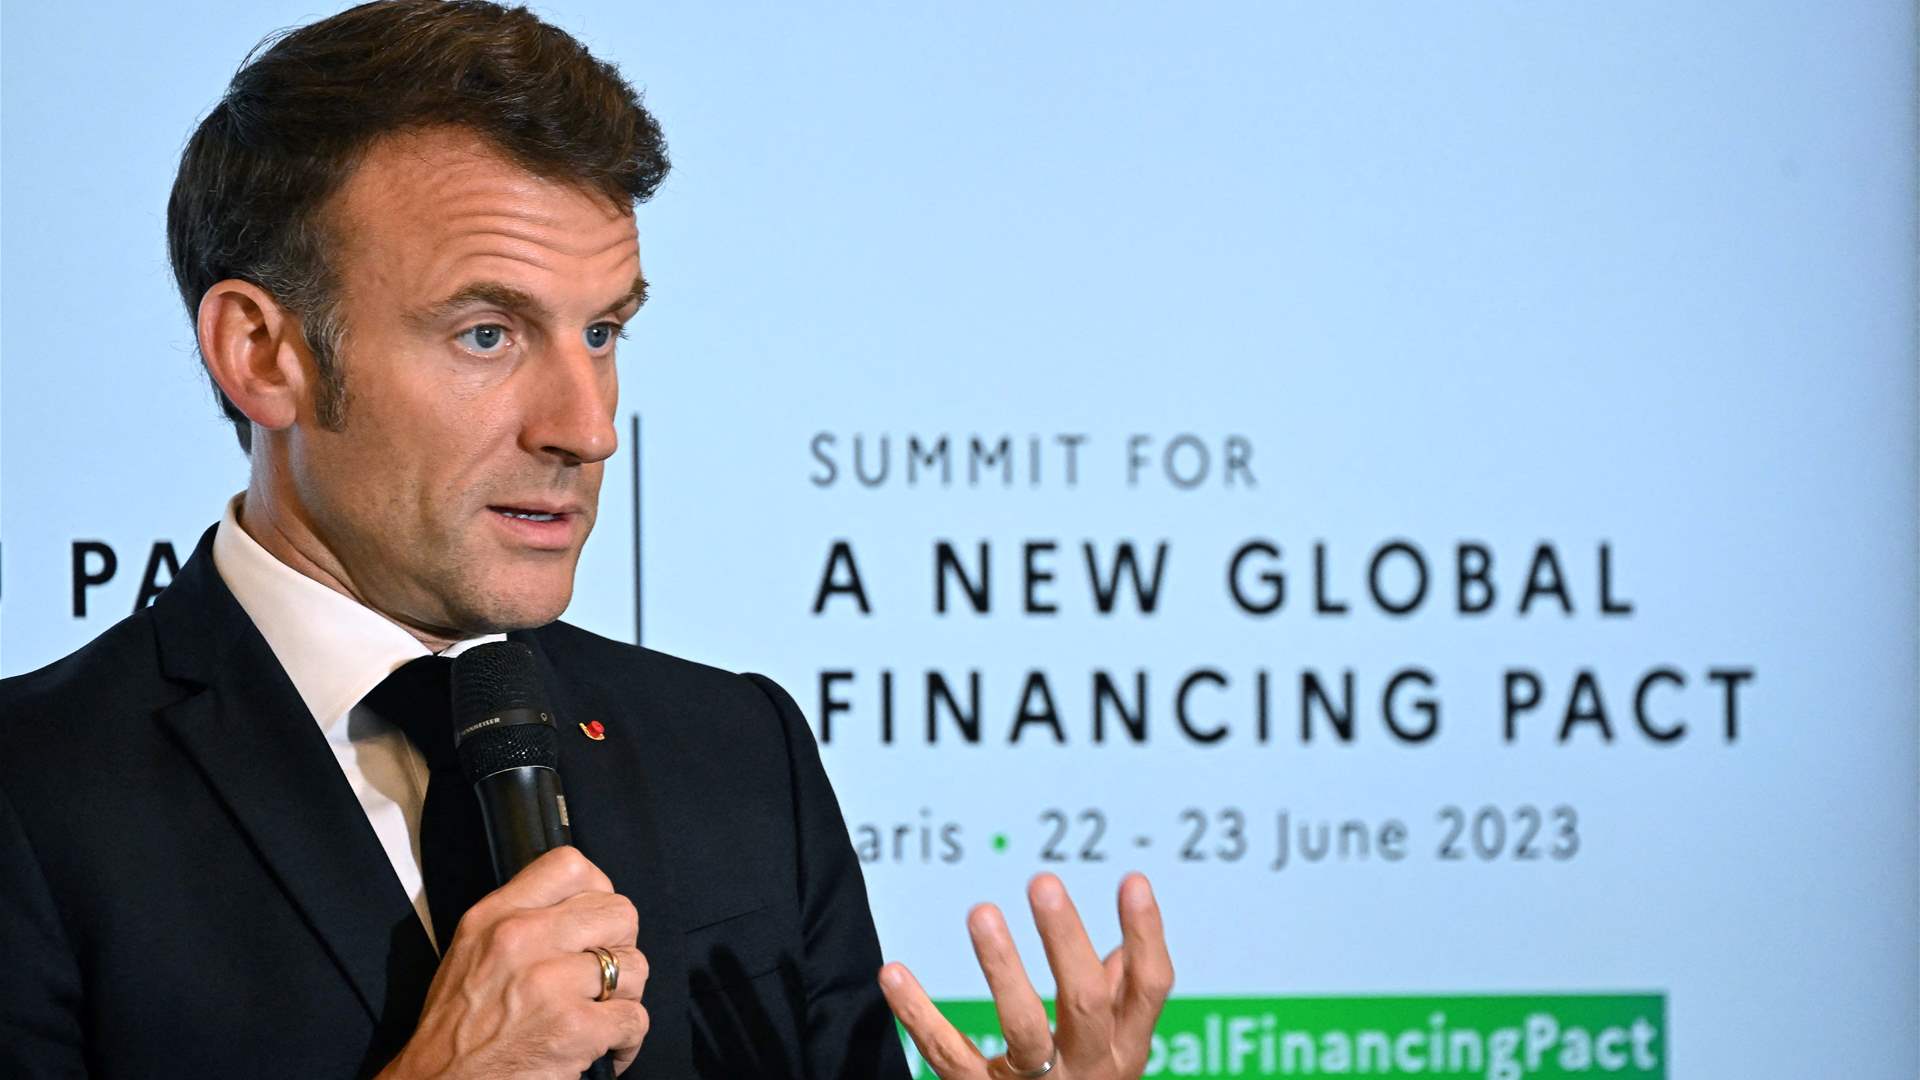 Global Financial Pact Summit in Paris: Macron&#39;s vision for poverty and climate change